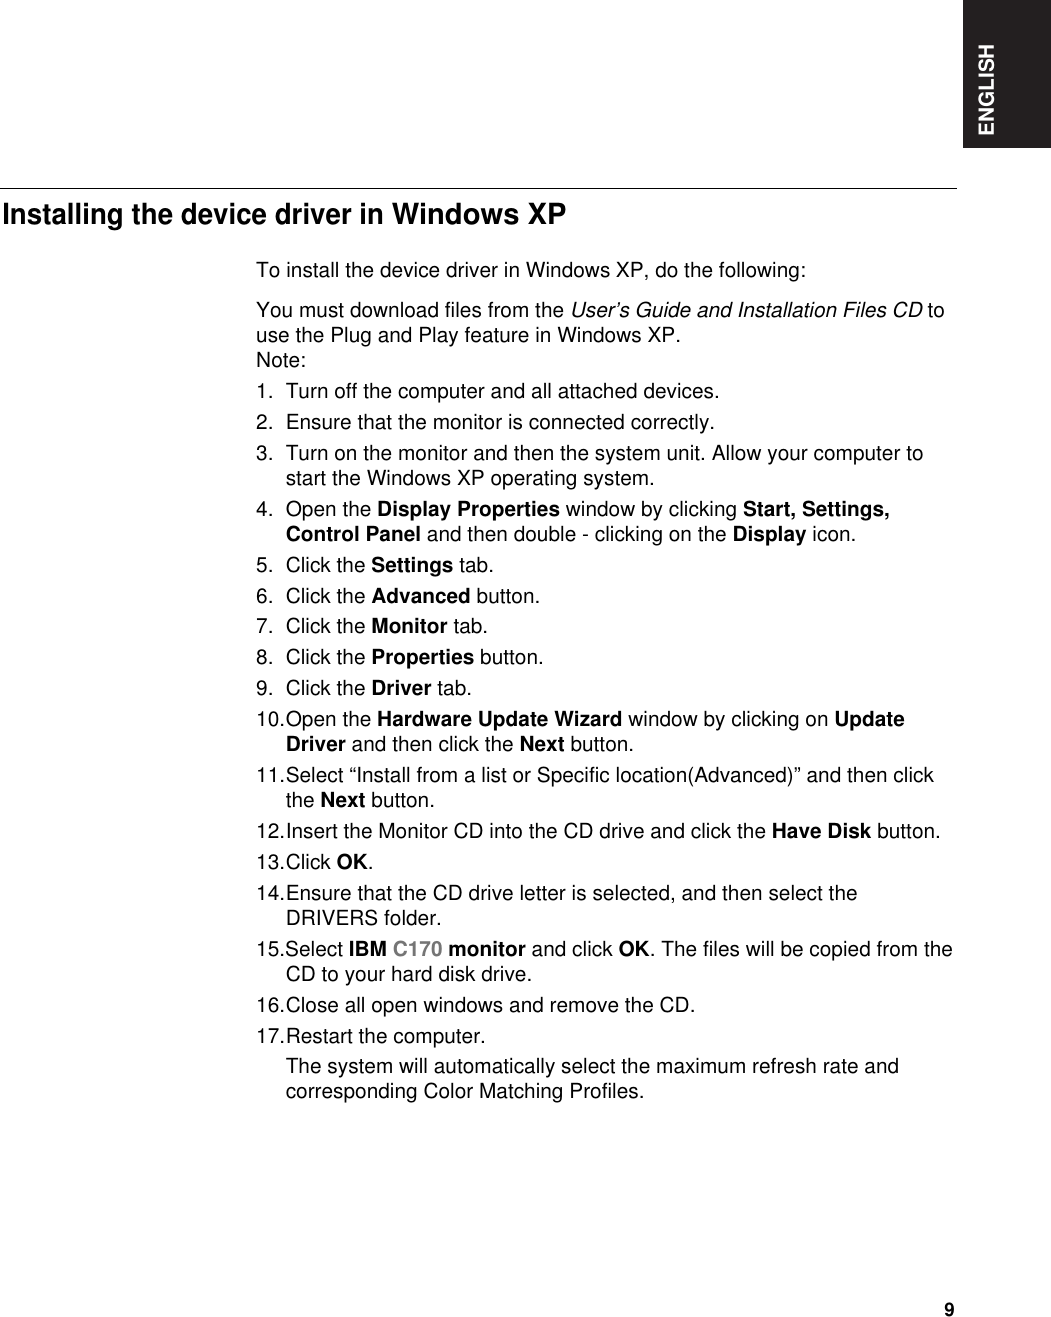 ENGLISH9To install the device driver in Windows XP, do the following: You must download files from the User’s Guide and Installation Files CD touse the Plug and Play feature in Windows XP.Note:1. Turn off the computer and all attached devices.2. Ensure that the monitor is connected correctly.3. Turn on the monitor and then the system unit. Allow your computer tostart the Windows XP operating system.4. Open the Display Properties window by clicking Start, Settings,Control Panel and then double - clicking on the Display icon.5. Click the Settings tab.6. Click the Advanced button.7. Click the Monitor tab.8. Click the Properties button.9. Click the Driver tab.10.Open the Hardware Update Wizard window by clicking on UpdateDriver and then click the Next button.11.Select “Install from a list or Specific location(Advanced)” and then clickthe Next button.12.Insert the Monitor CD into the CD drive and click the Have Disk button.13.Click OK.14.Ensure that the CD drive letter is selected, and then select theDRIVERS folder.15.Select IBM C170 monitor and click OK. The files will be copied from theCD to your hard disk drive.16.Close all open windows and remove the CD.17.Restart the computer.The system will automatically select the maximum refresh rate andcorresponding Color Matching Profiles.Installing the device driver in Windows XP 